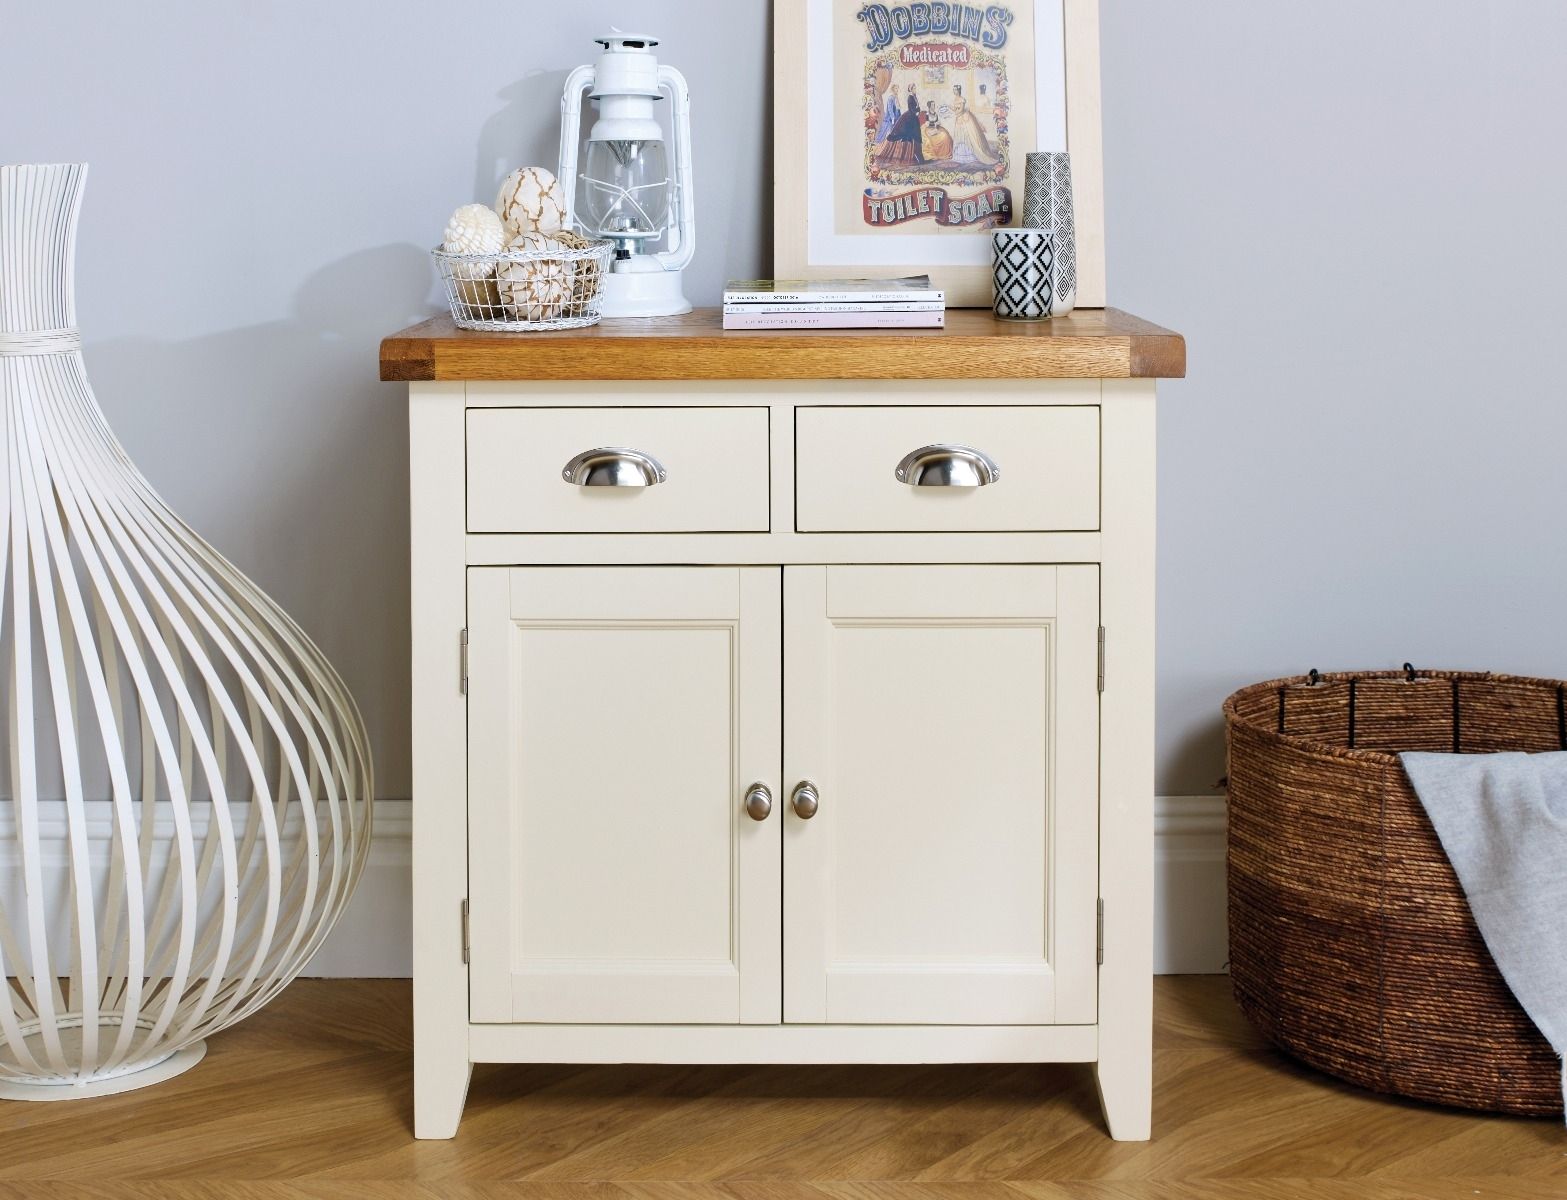 Small Cream Painted Oak Sideboard | 80cm Country Cottage | Free With Regard To Most Popular Lockwood Sideboards (View 20 of 20)